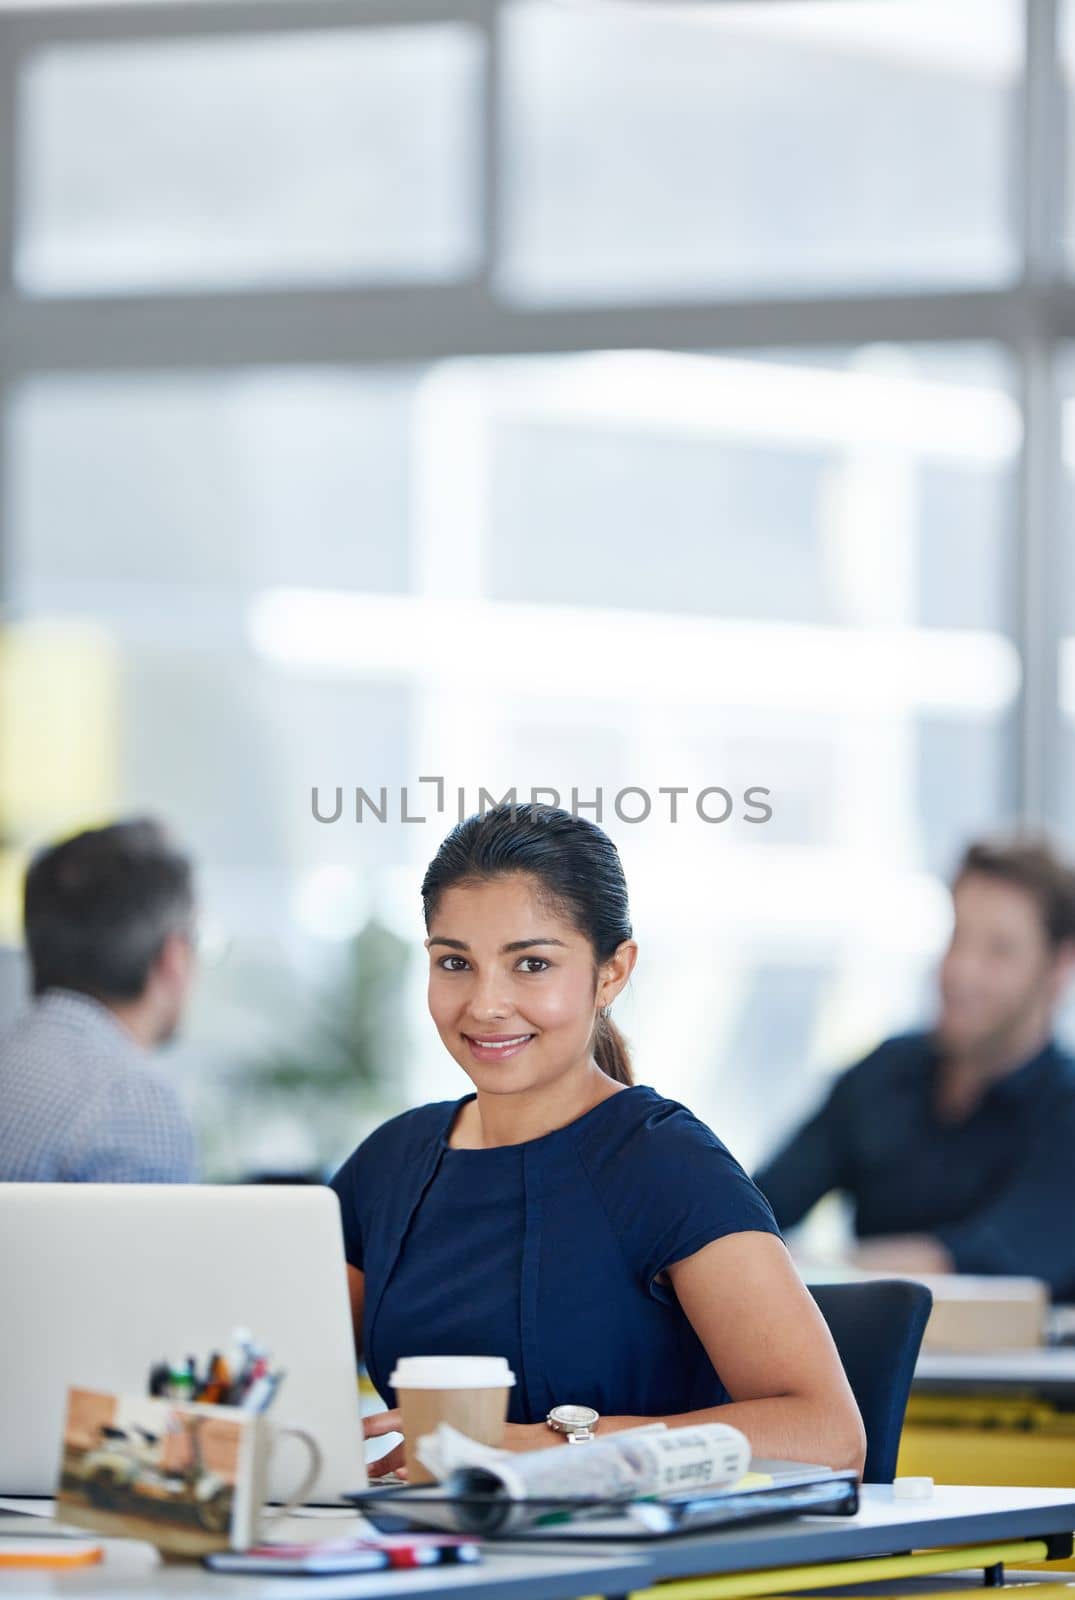 She brings a fresh energy into the office. Portrait of a designer sitting at her desk working on a laptop with colleagues in the background